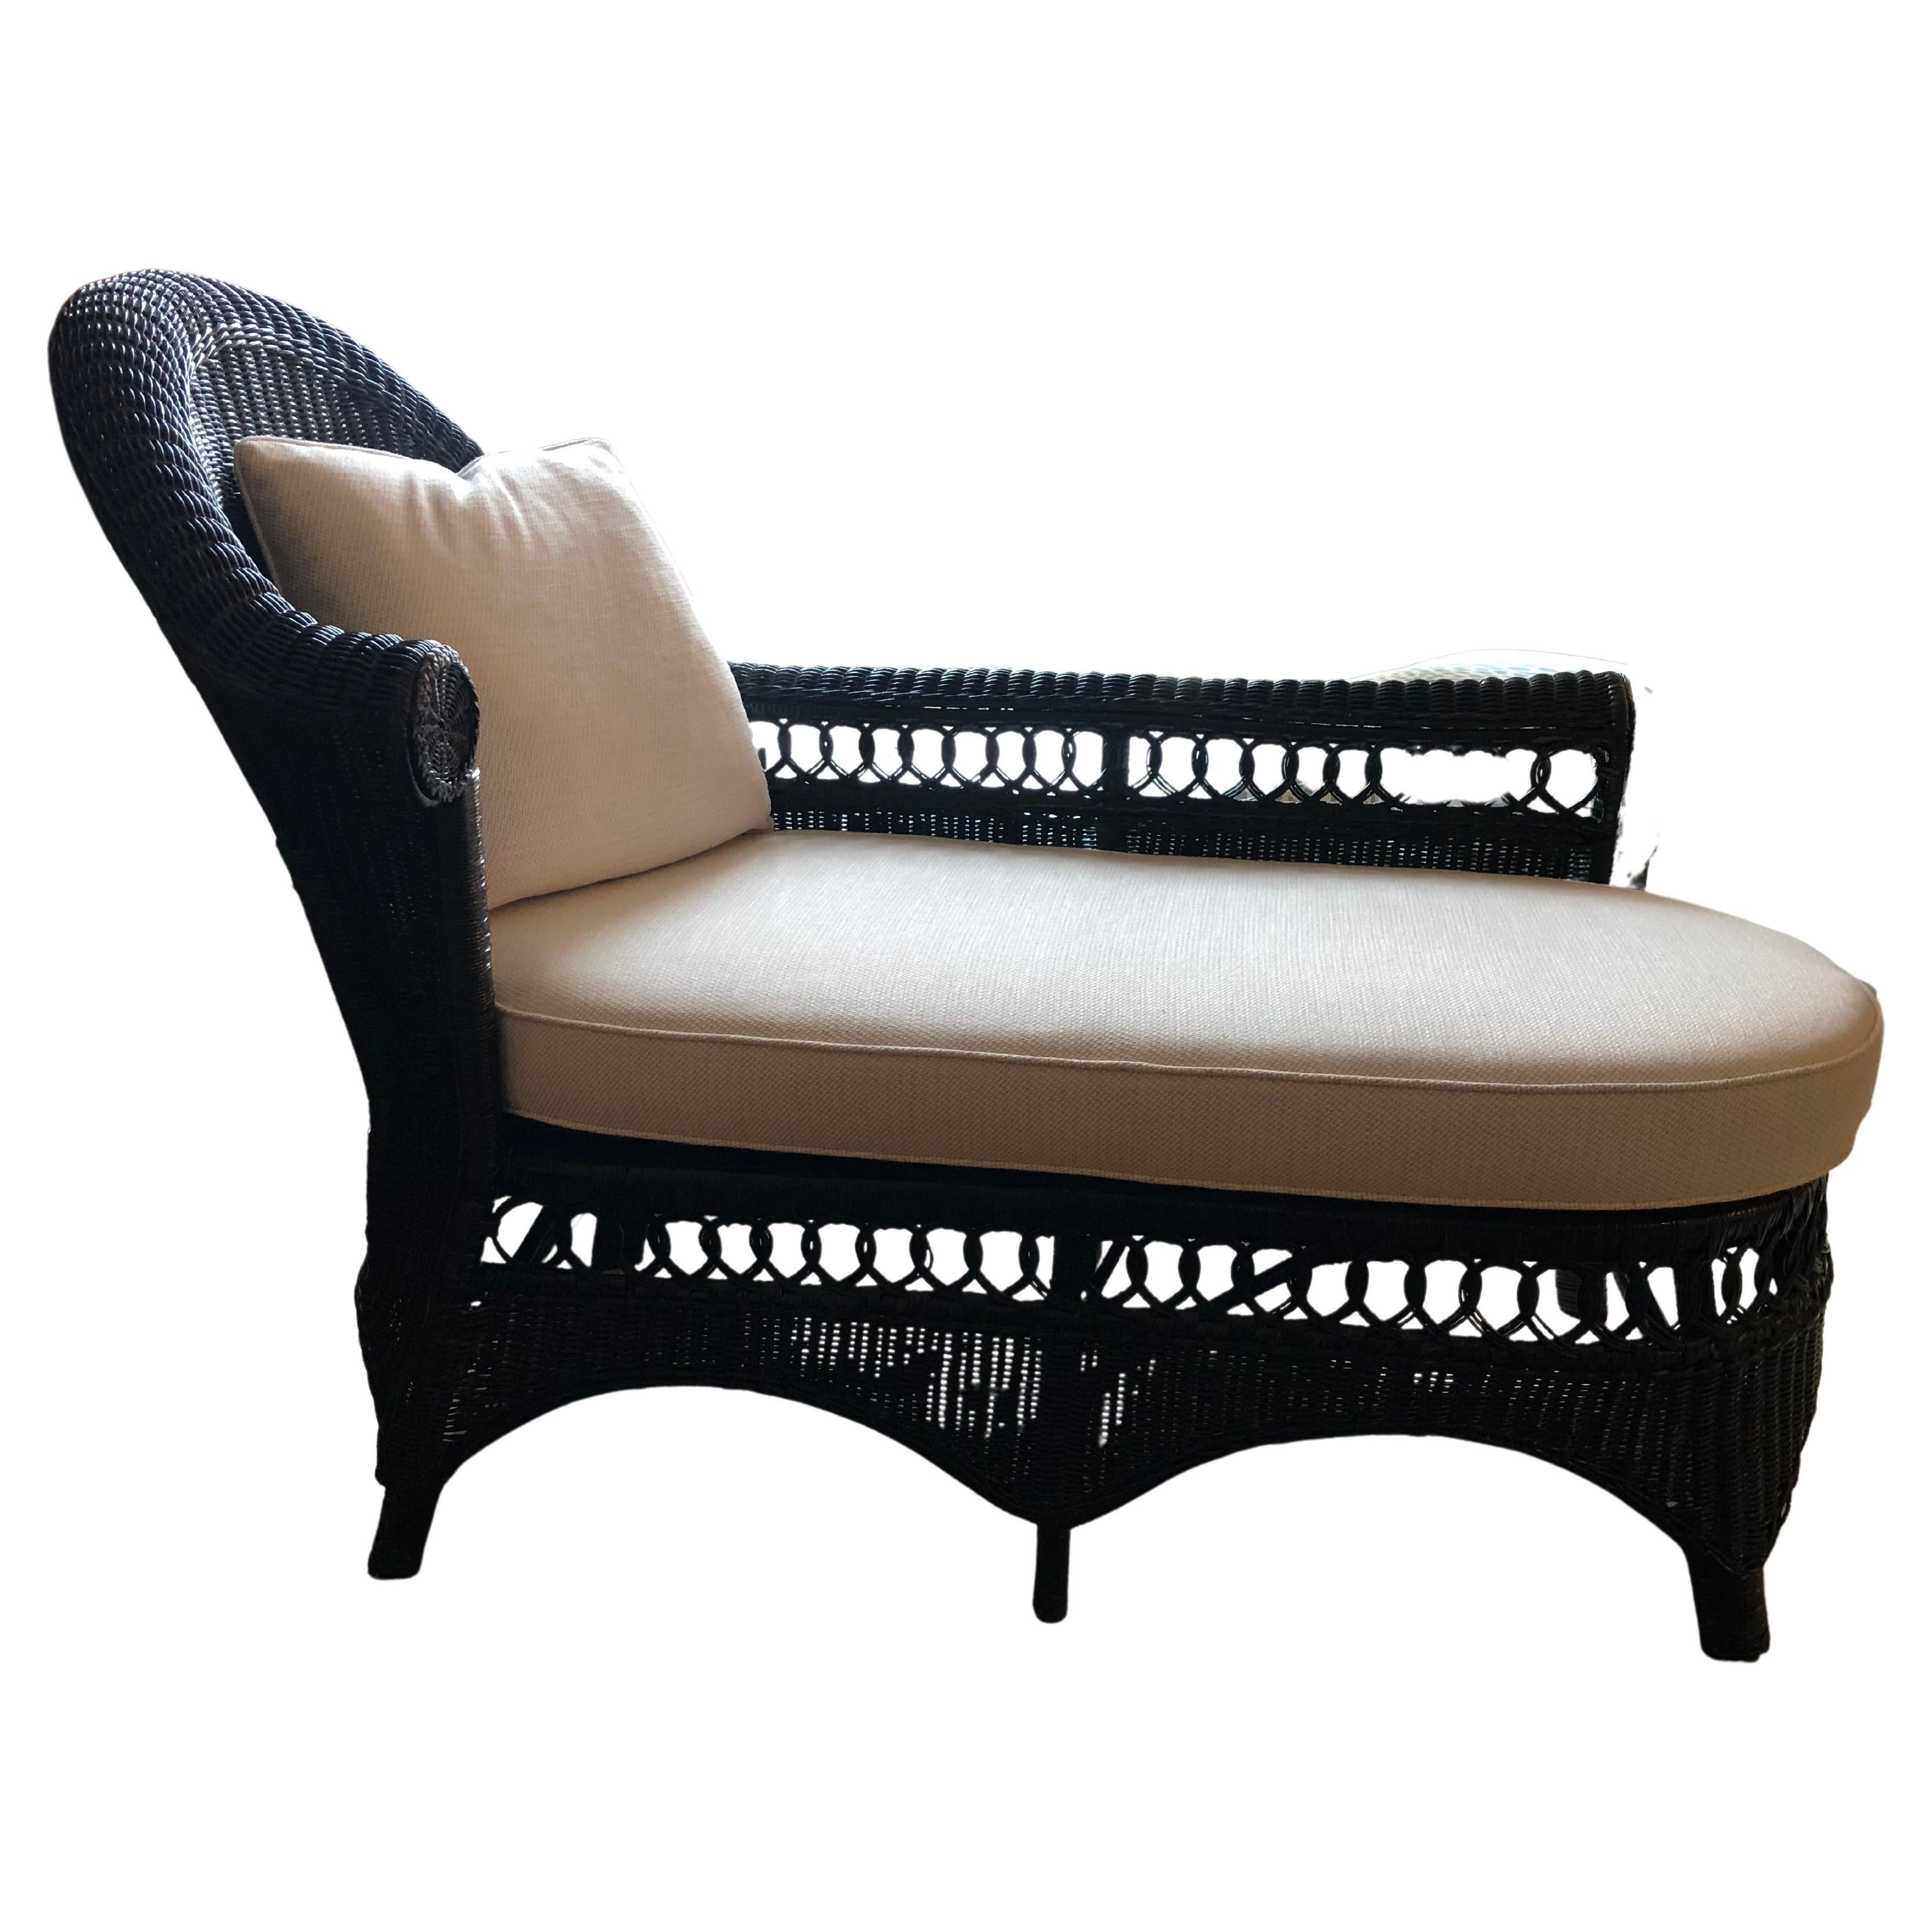 Incredible Restored Vintage Painted Wicker Chaise Longue with New Cushion  For Sale at 1stDibs